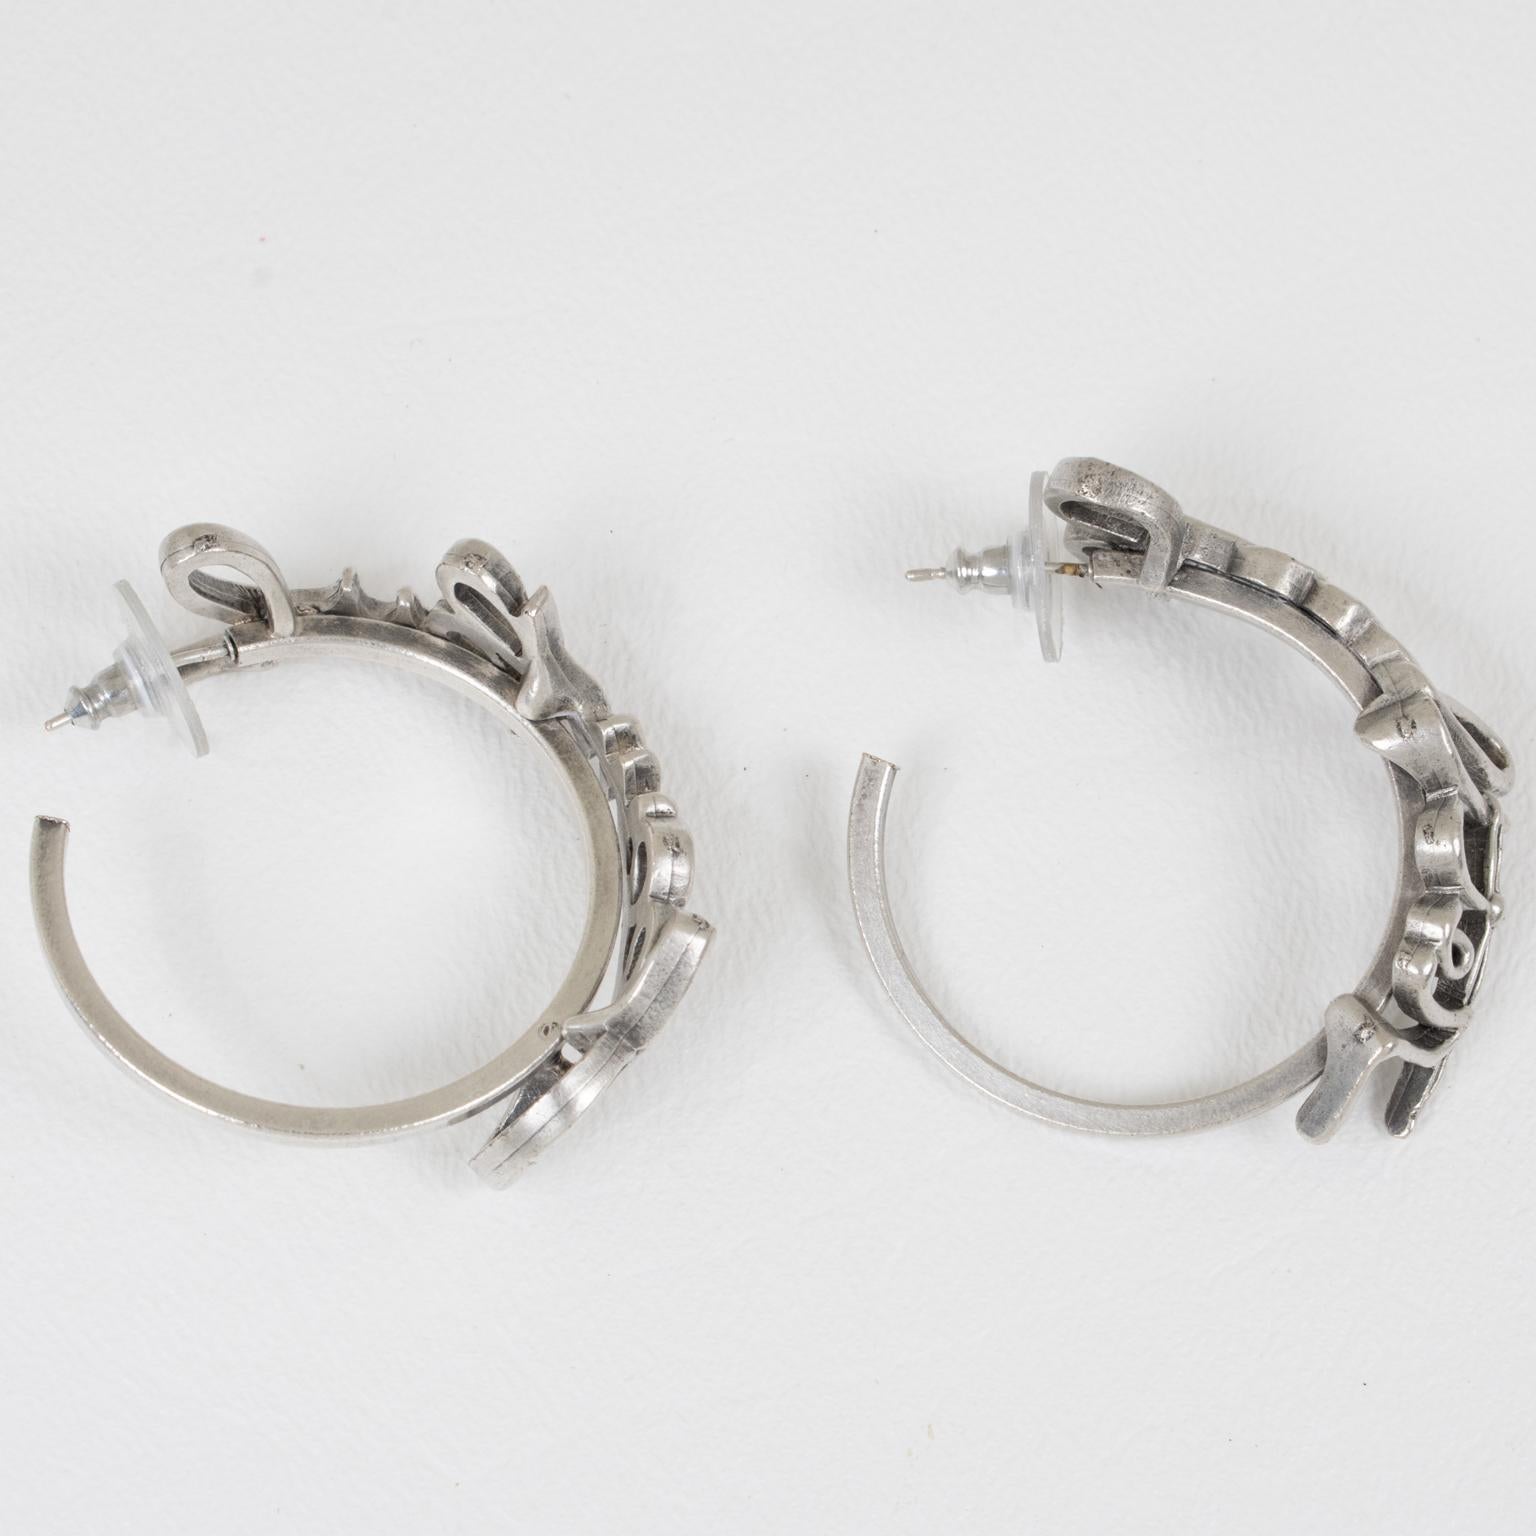 Jean Paul Gaultier Couture Cursive Silver Plate Hoop Pierced Earrings In Excellent Condition For Sale In Atlanta, GA